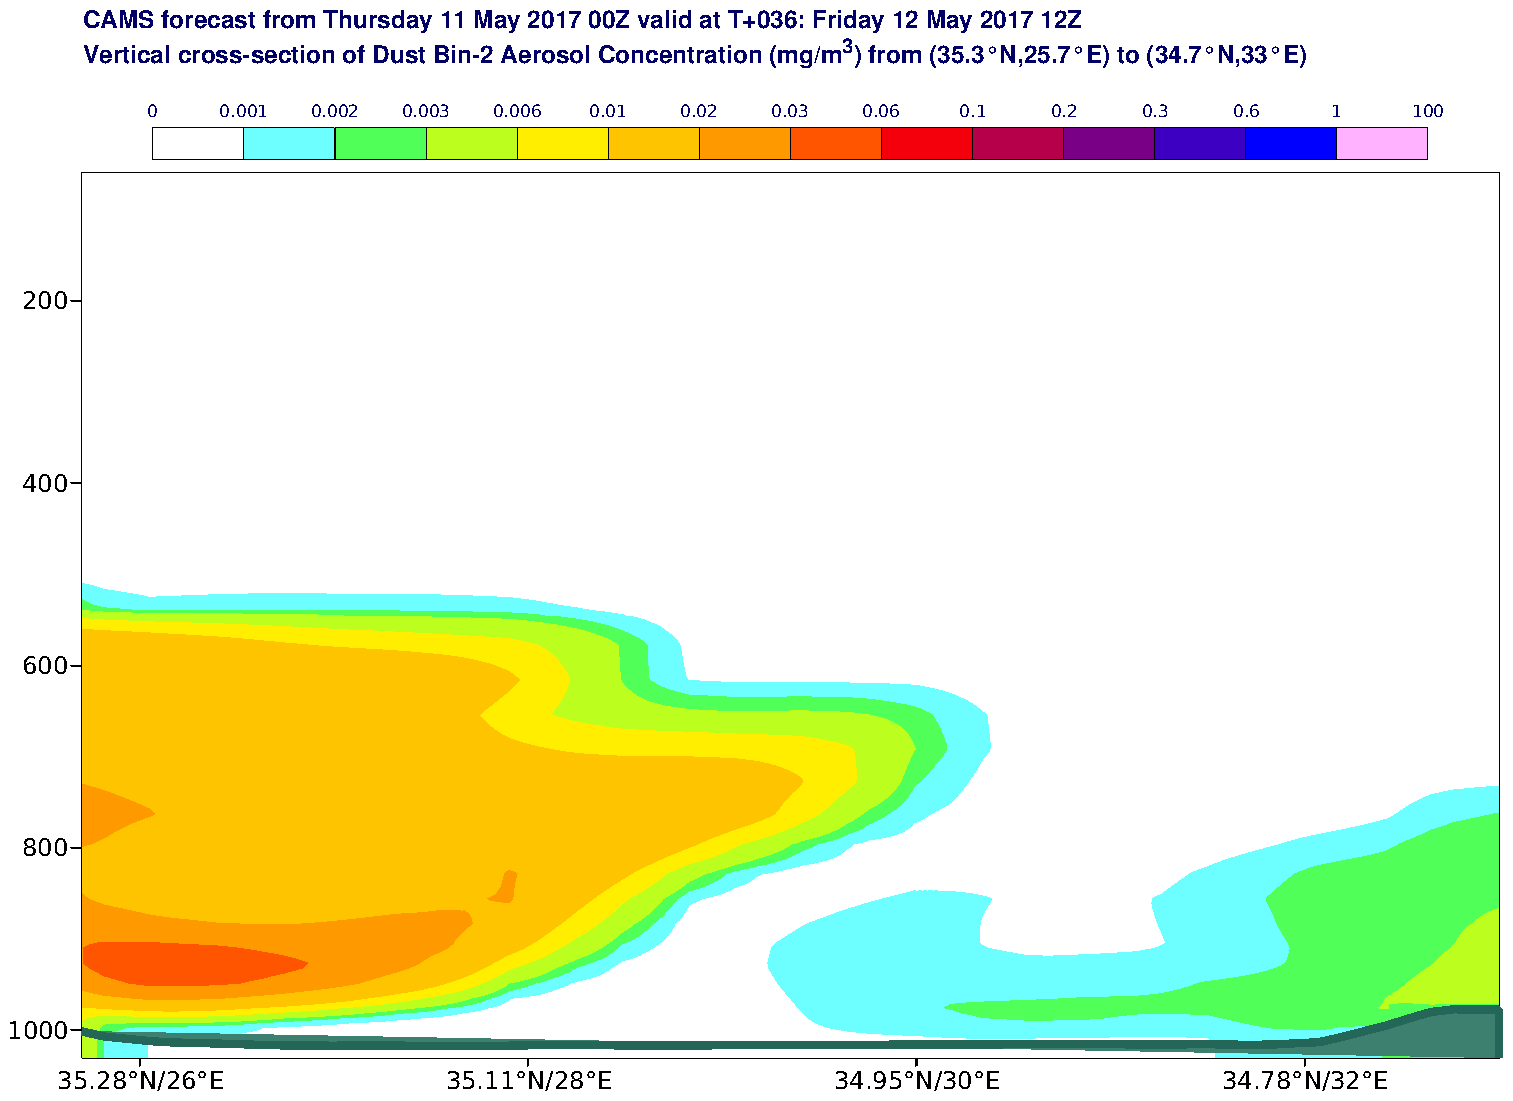 Vertical cross-section of Dust Bin-2 Aerosol Concentration (mg/m3) valid at T36 - 2017-05-12 12:00